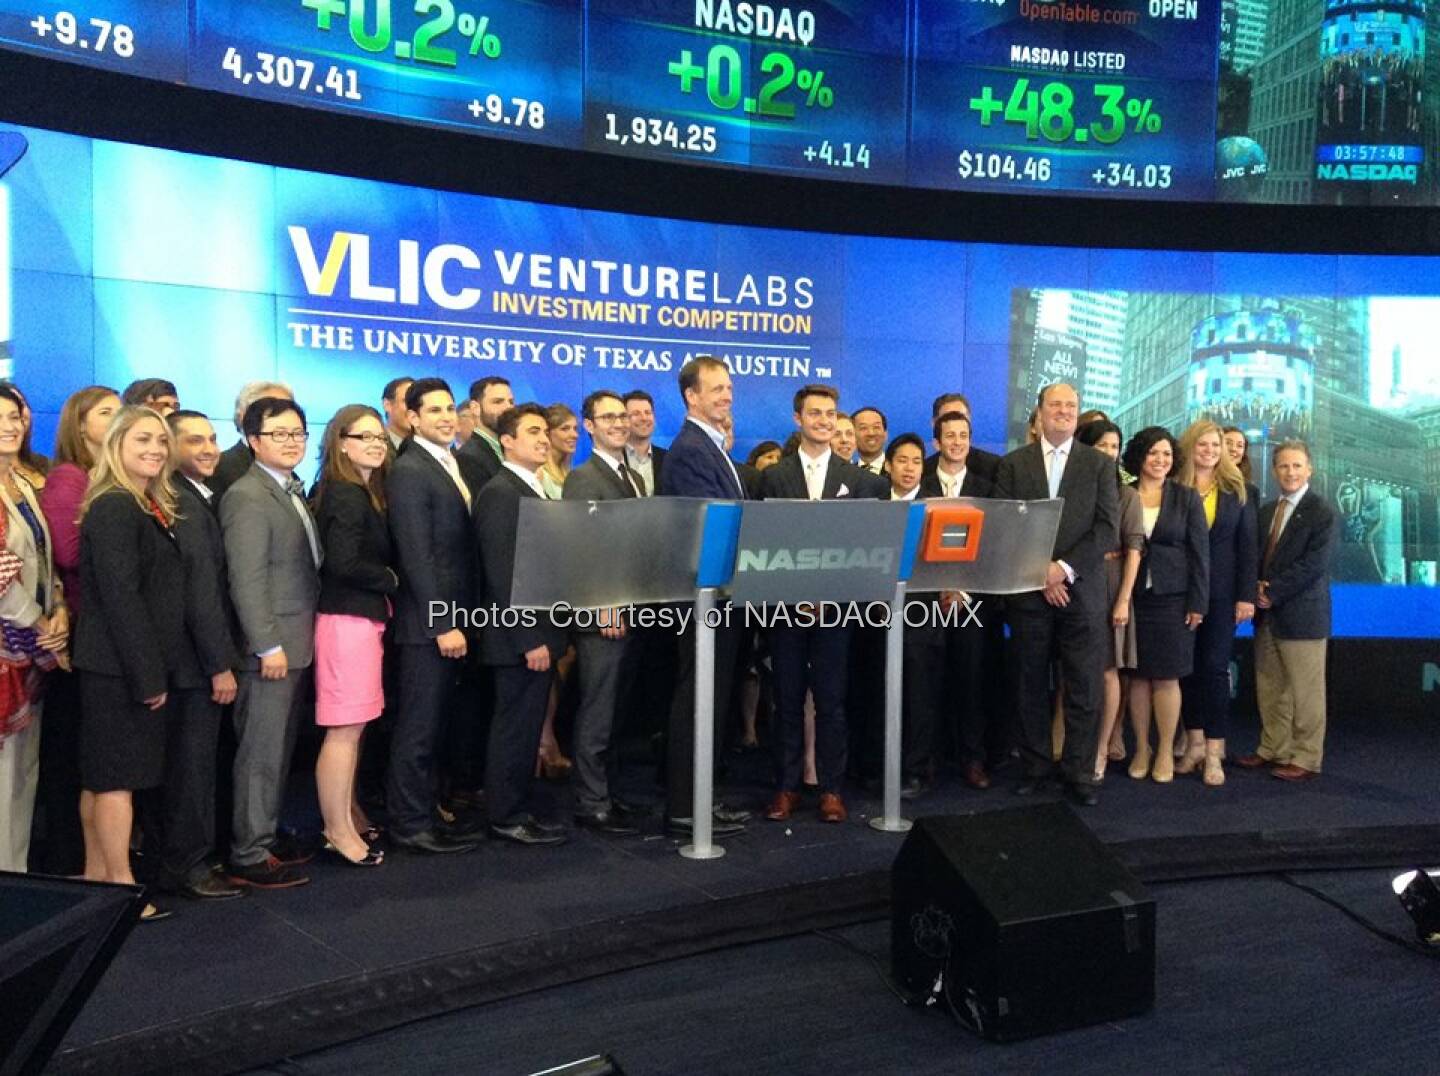 University of Texas at Austin Venture Labs Investment Competition rings the Nasdaq Closing Bell!  Source: http://facebook.com/NASDAQ